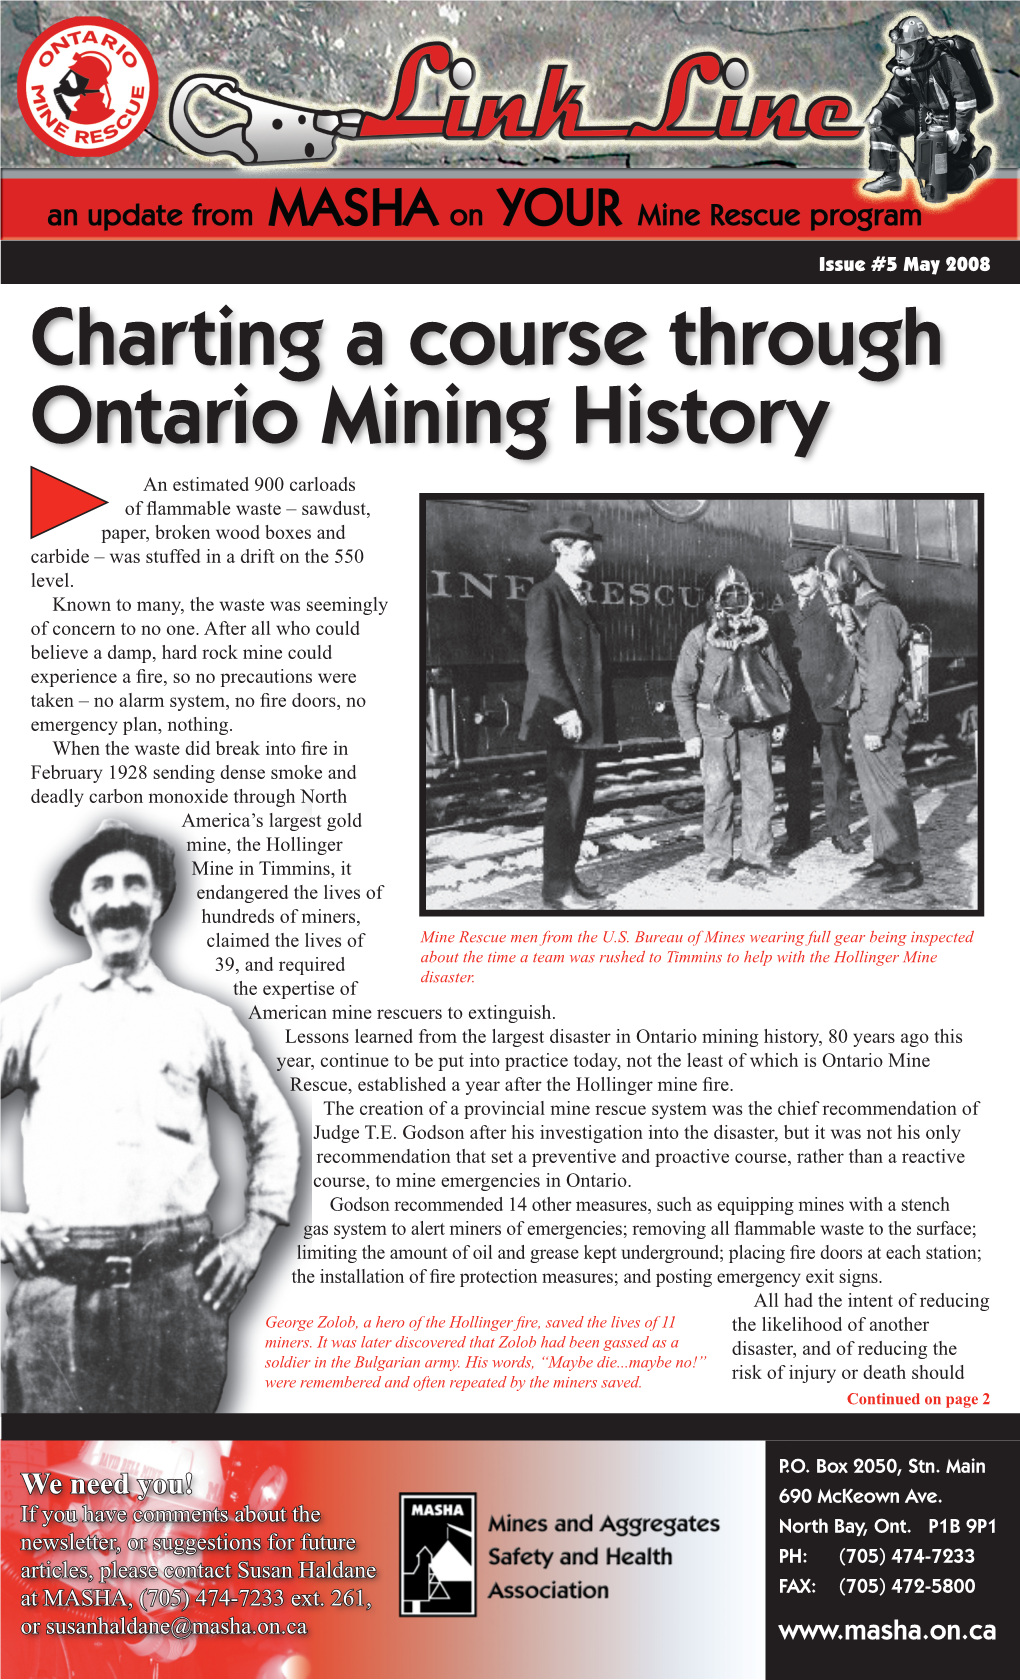 Charting a Course Through Ontario Mining History